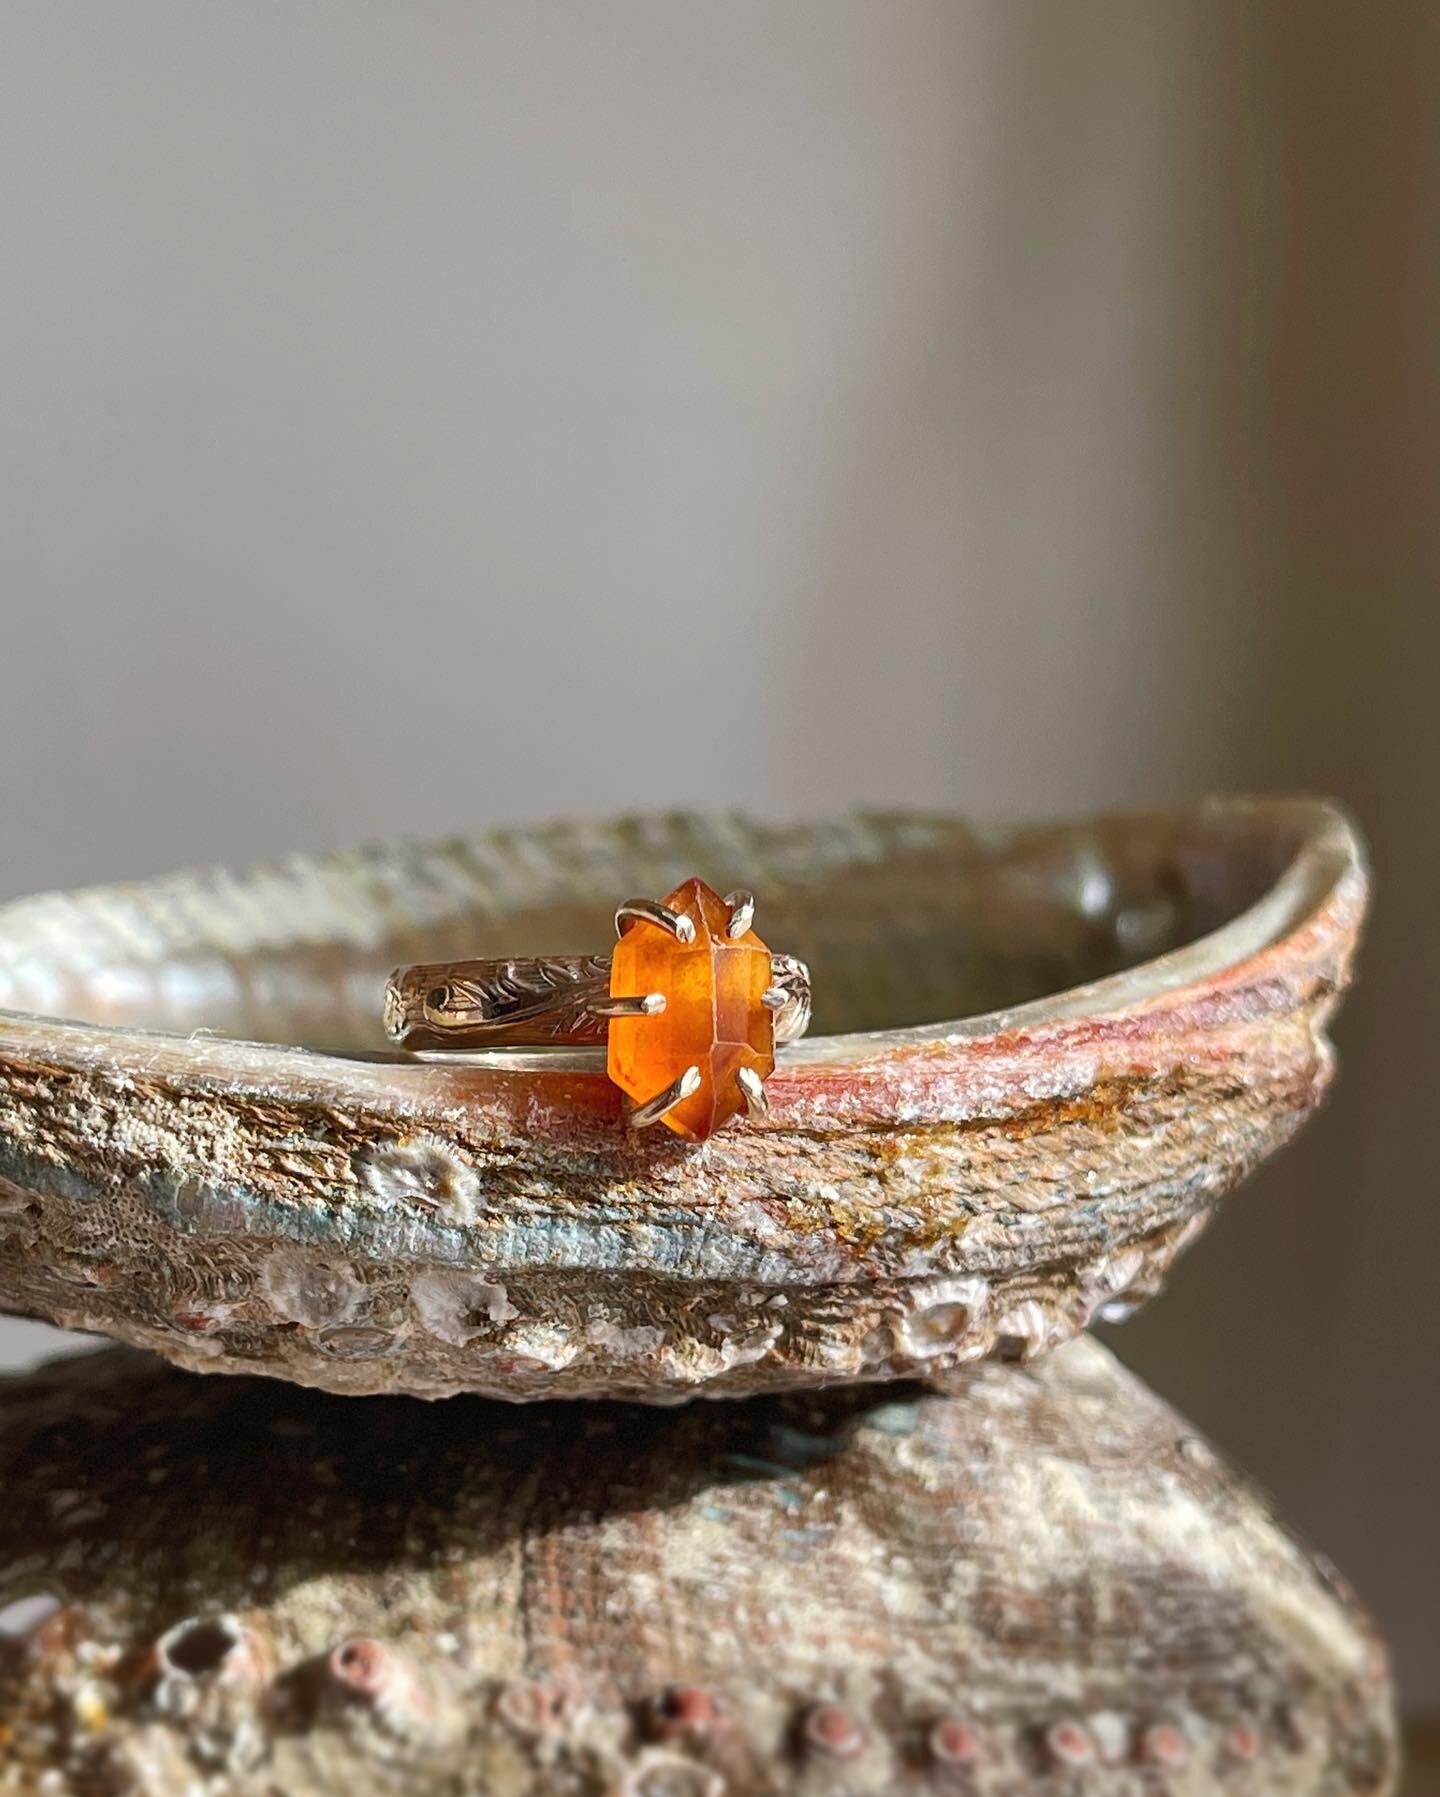 I have been so fortunate to have made some incredibly meaningful bespoke pieces this year- such as this Hessonite Garnet and 14 k gold fill ring, made for a new mama on her first Mother's Day. Each commission sets my heart a'flutter. 😌

#bespokejewe